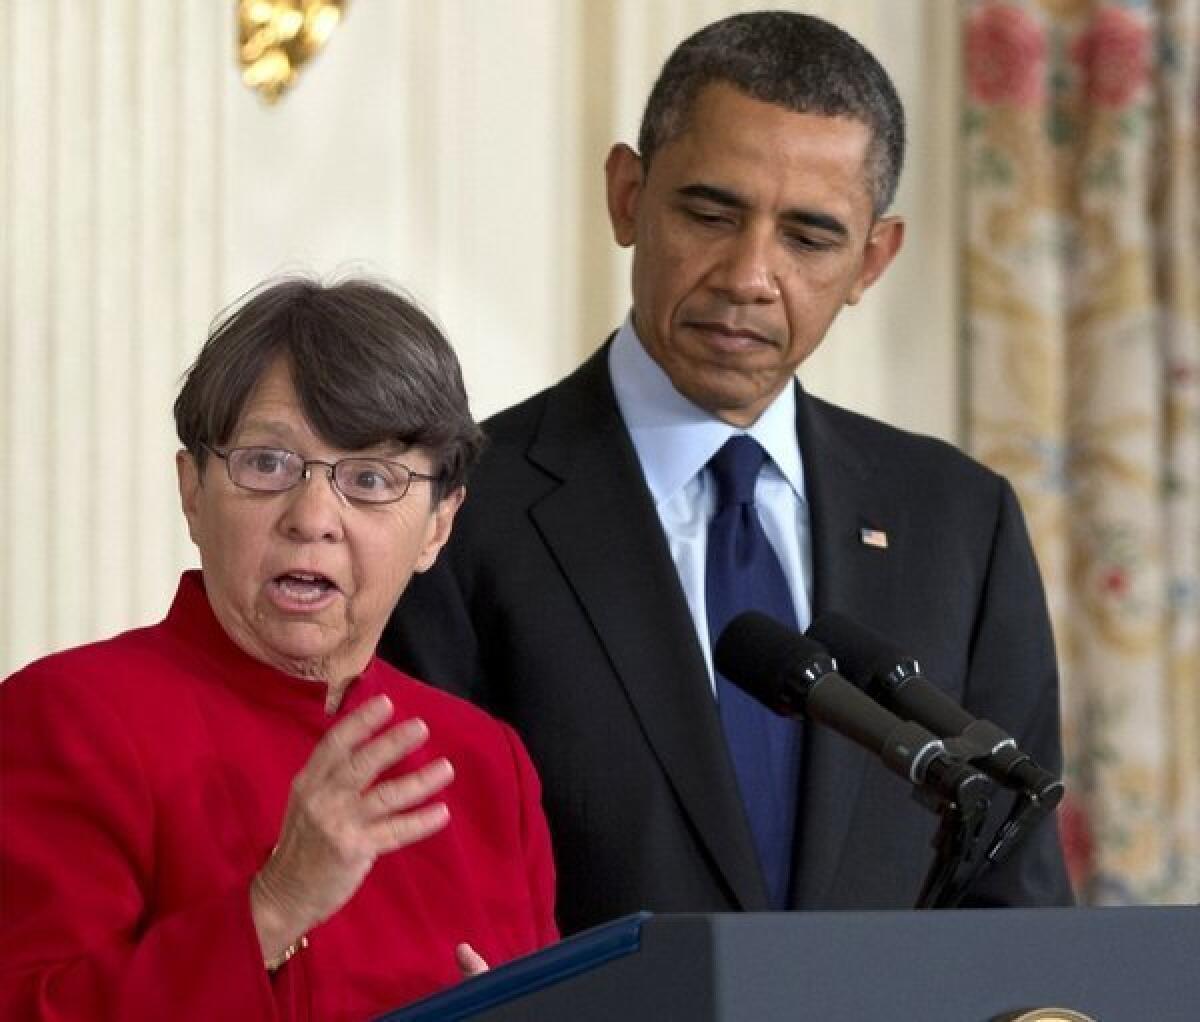 Mary Joe White and President Obama at a news conference in January during which he announced her nomination to lead the Securities and Exchange Commission.